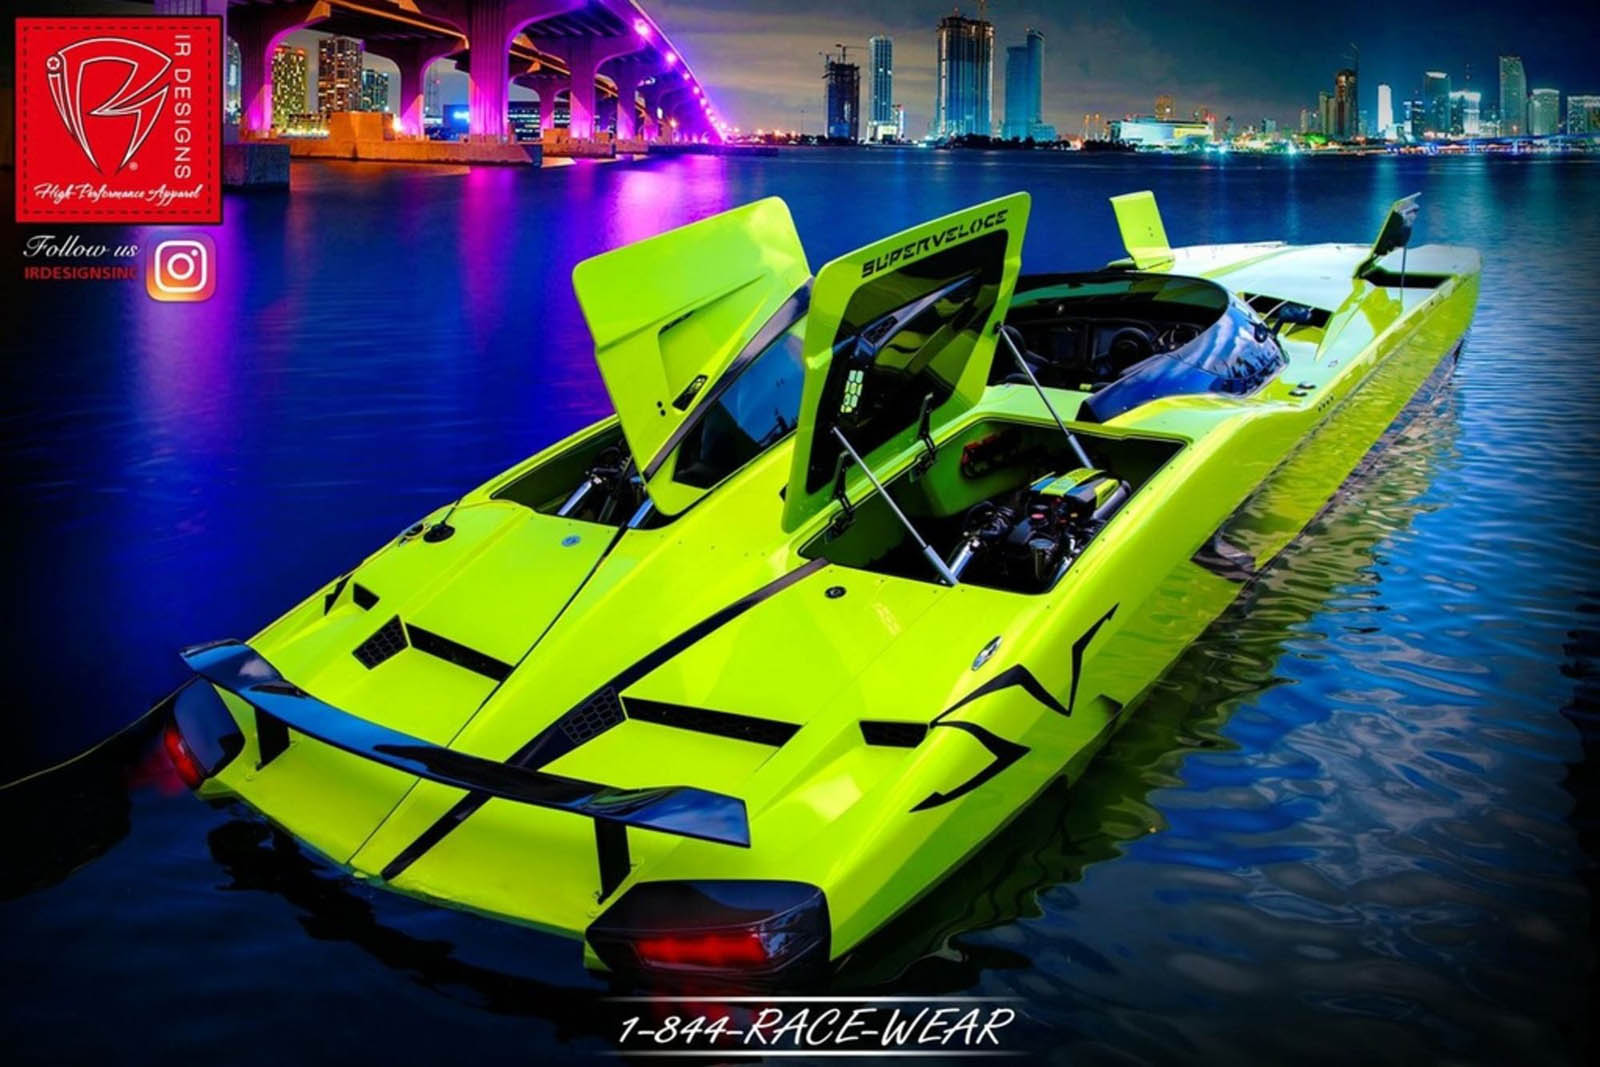 Buy This Aventador SV And A Matching MTI G6 Boat